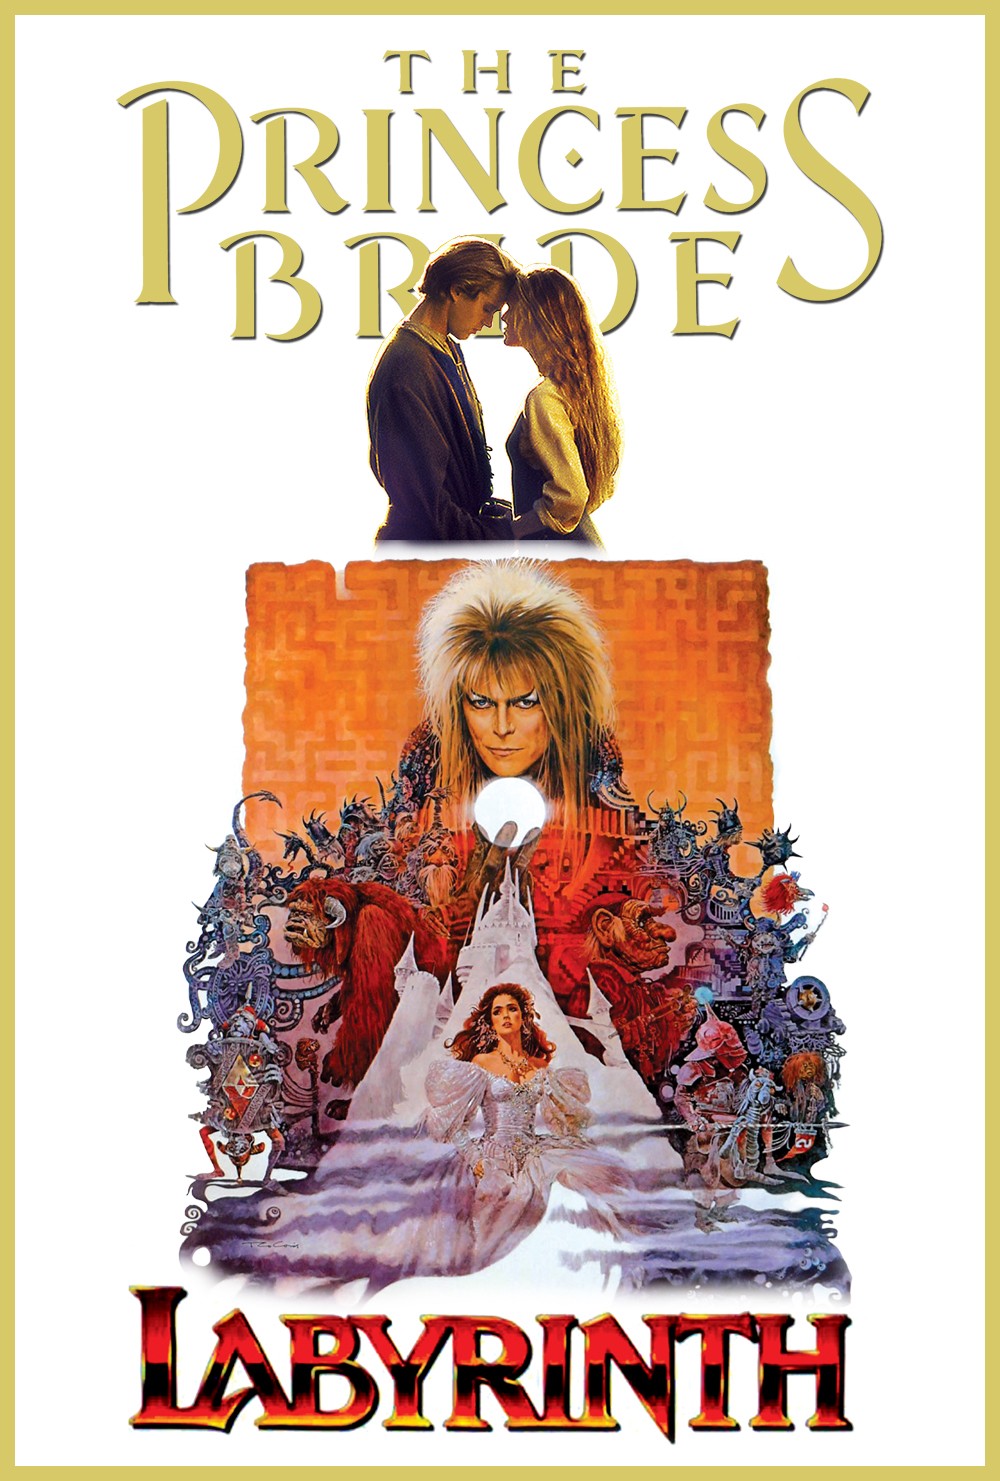 THE PRINCESS BRIDE & LABYRINTH - Double Feature